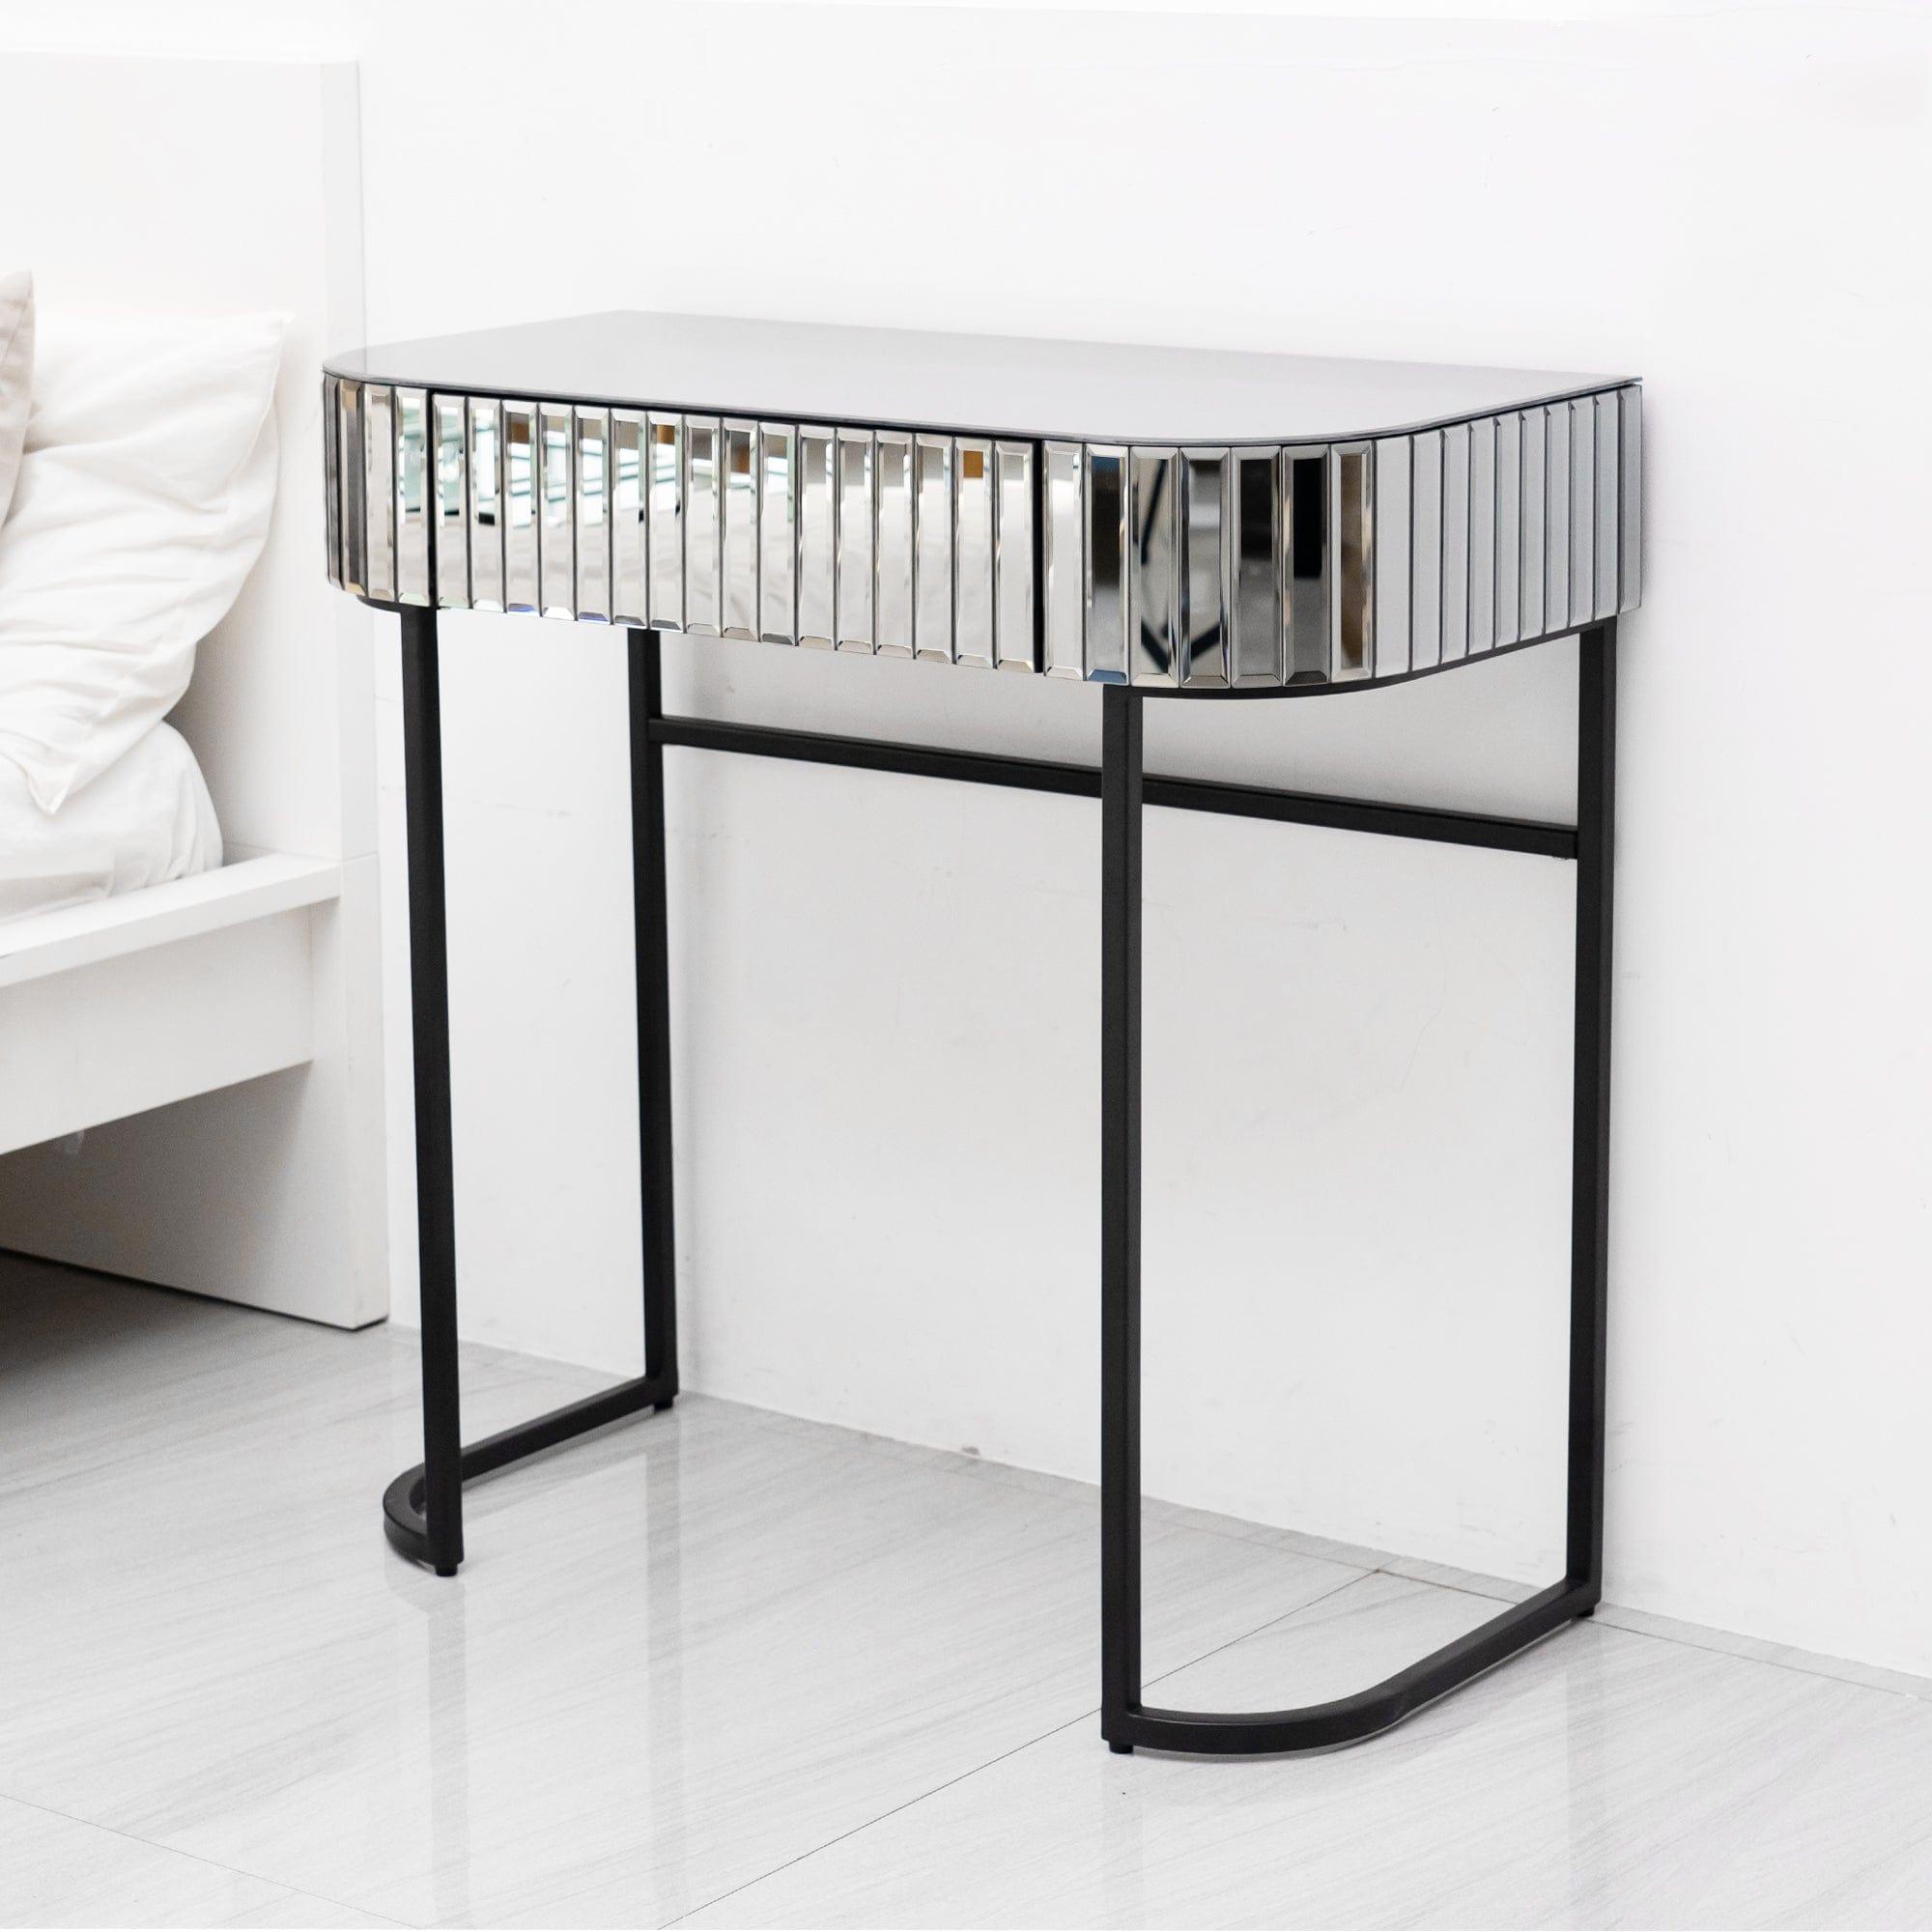 Shop Mirrored Vanity Table, Mirrored Dressing Table, Iron Frame Desk for Bedroom Studio Office(Gray Striped Mirrored) Mademoiselle Home Decor